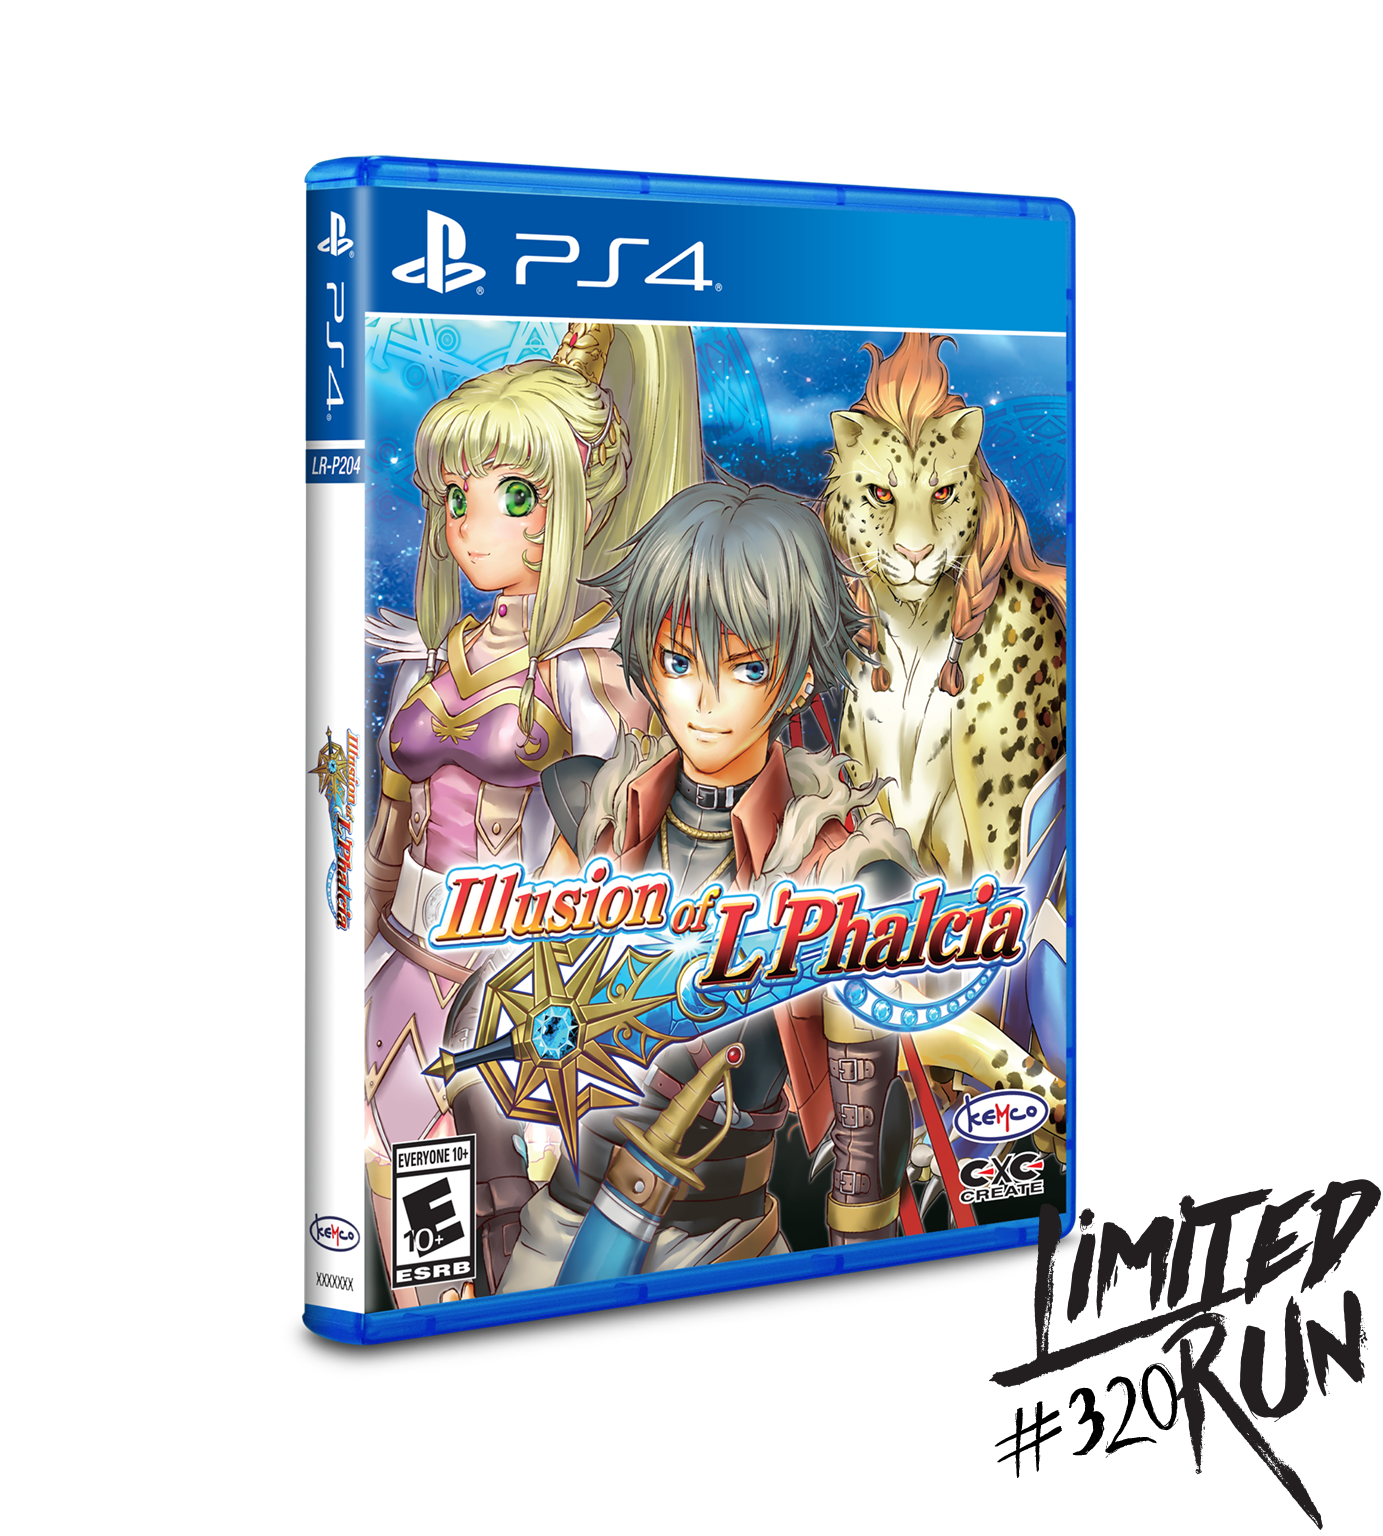 Limited Run 3 Illusion Of L Phalcia Ps4 Limited Run Games